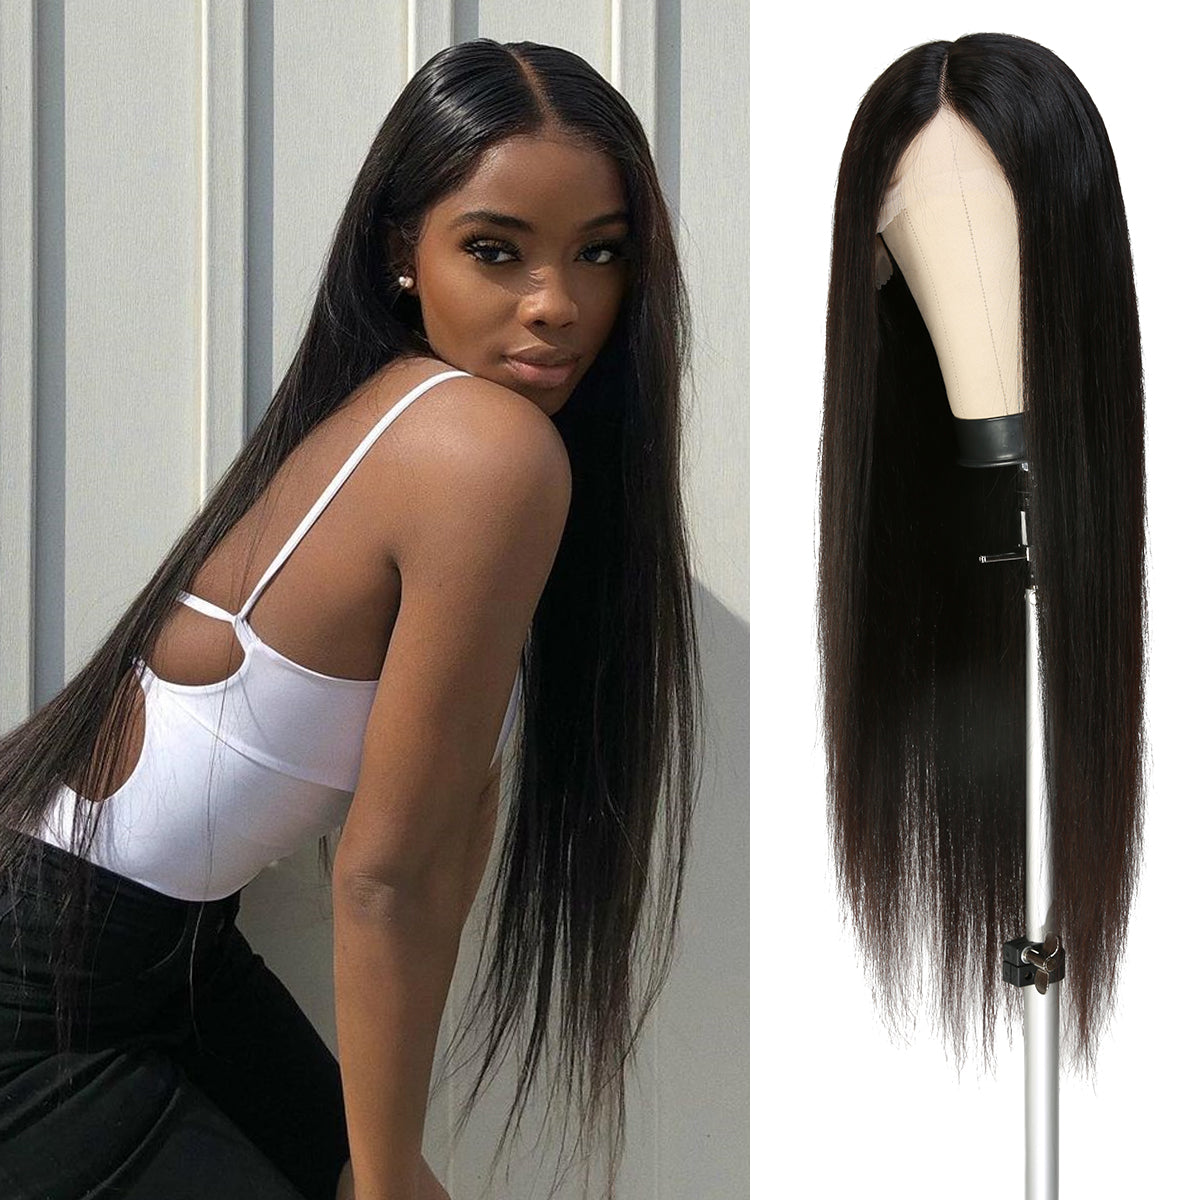 One of the most affordable wig types, Modern and classy straight look with silky smooth texture, Super soft and light weight, Natural Looking hairline with baby hair, Tangle Free & No Shedding. The wig comes ready to use. It can be dye, bleach and perm as you want.